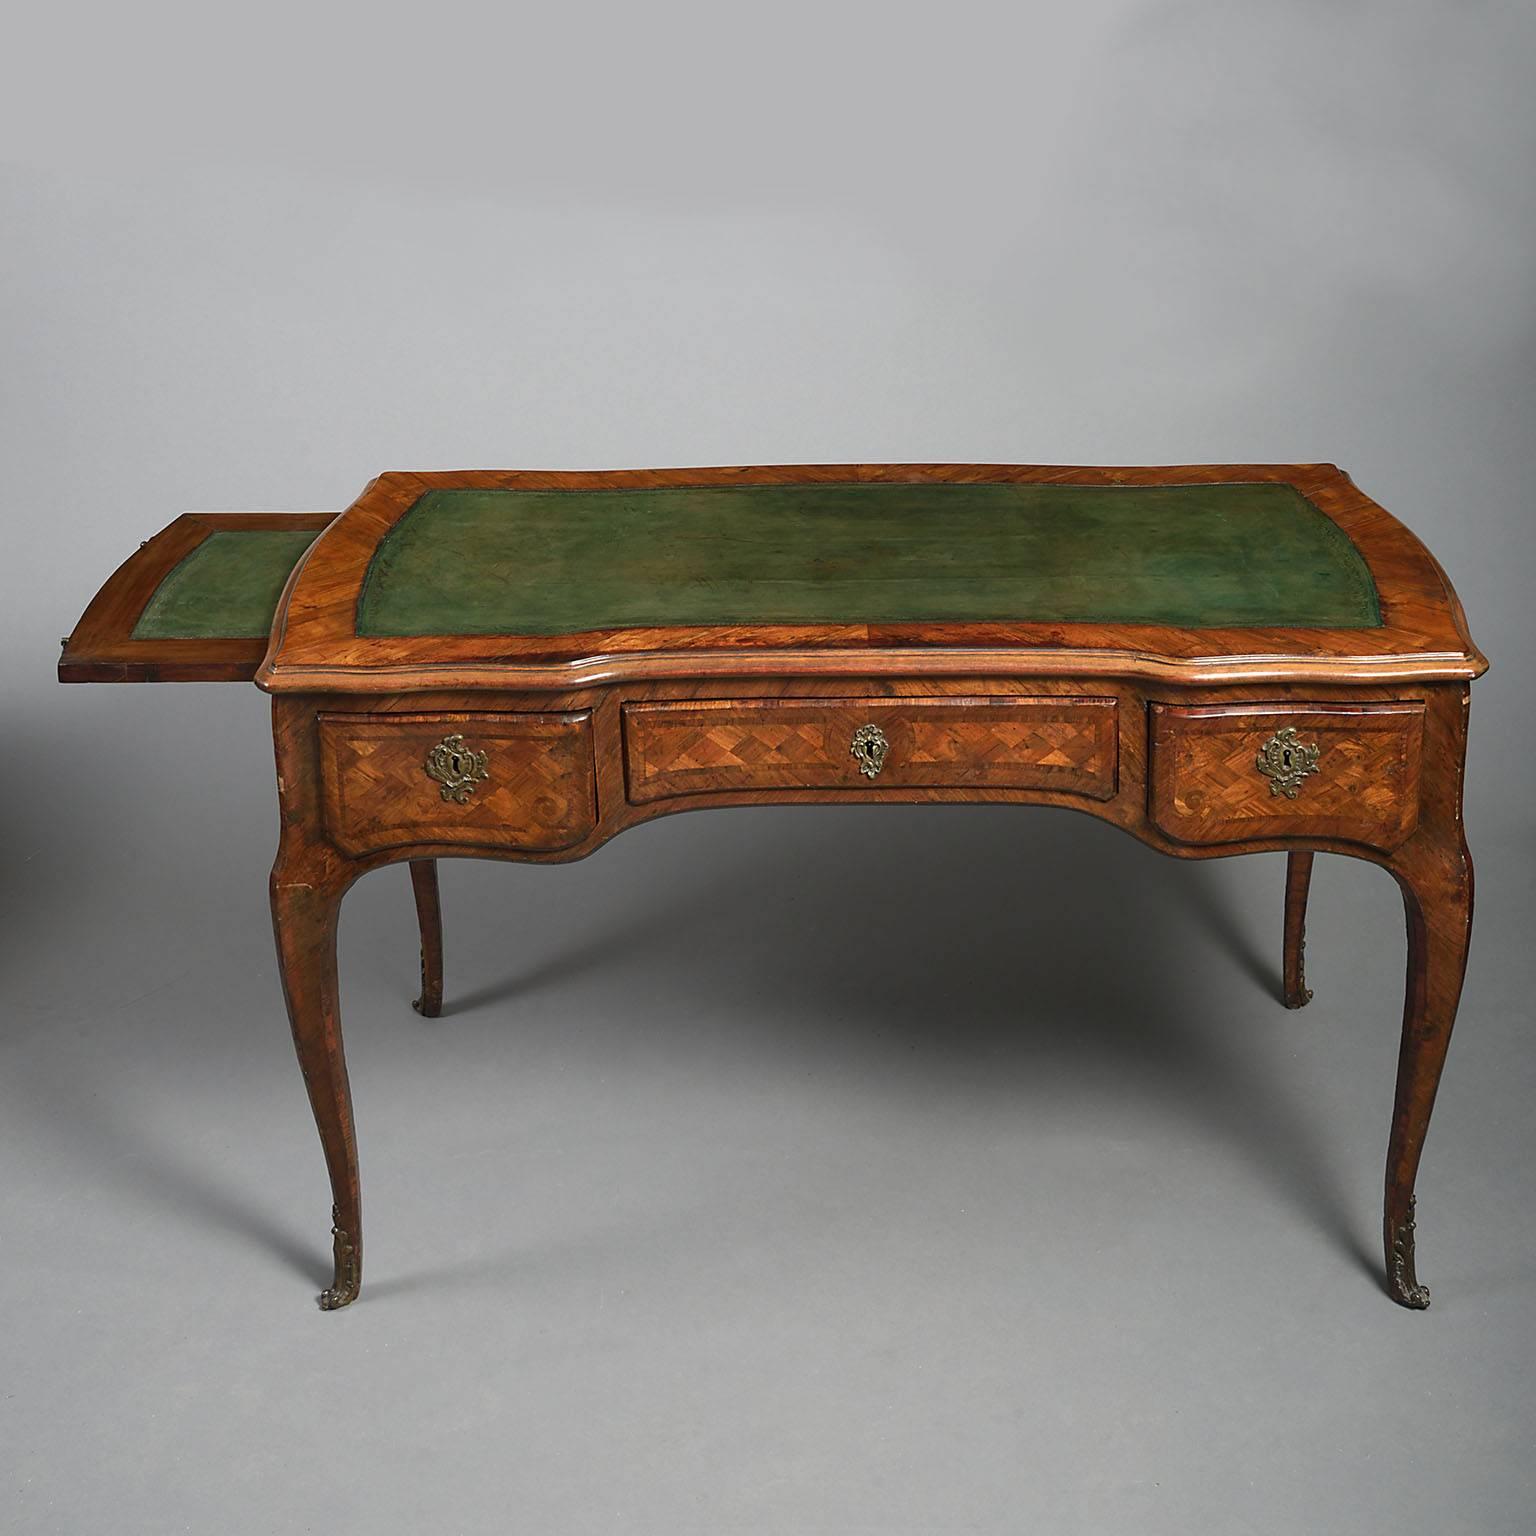 Mid-18th Century 18th Century Kingwood and Tulipwood Parquetry Serpentine Bureau-Plat For Sale